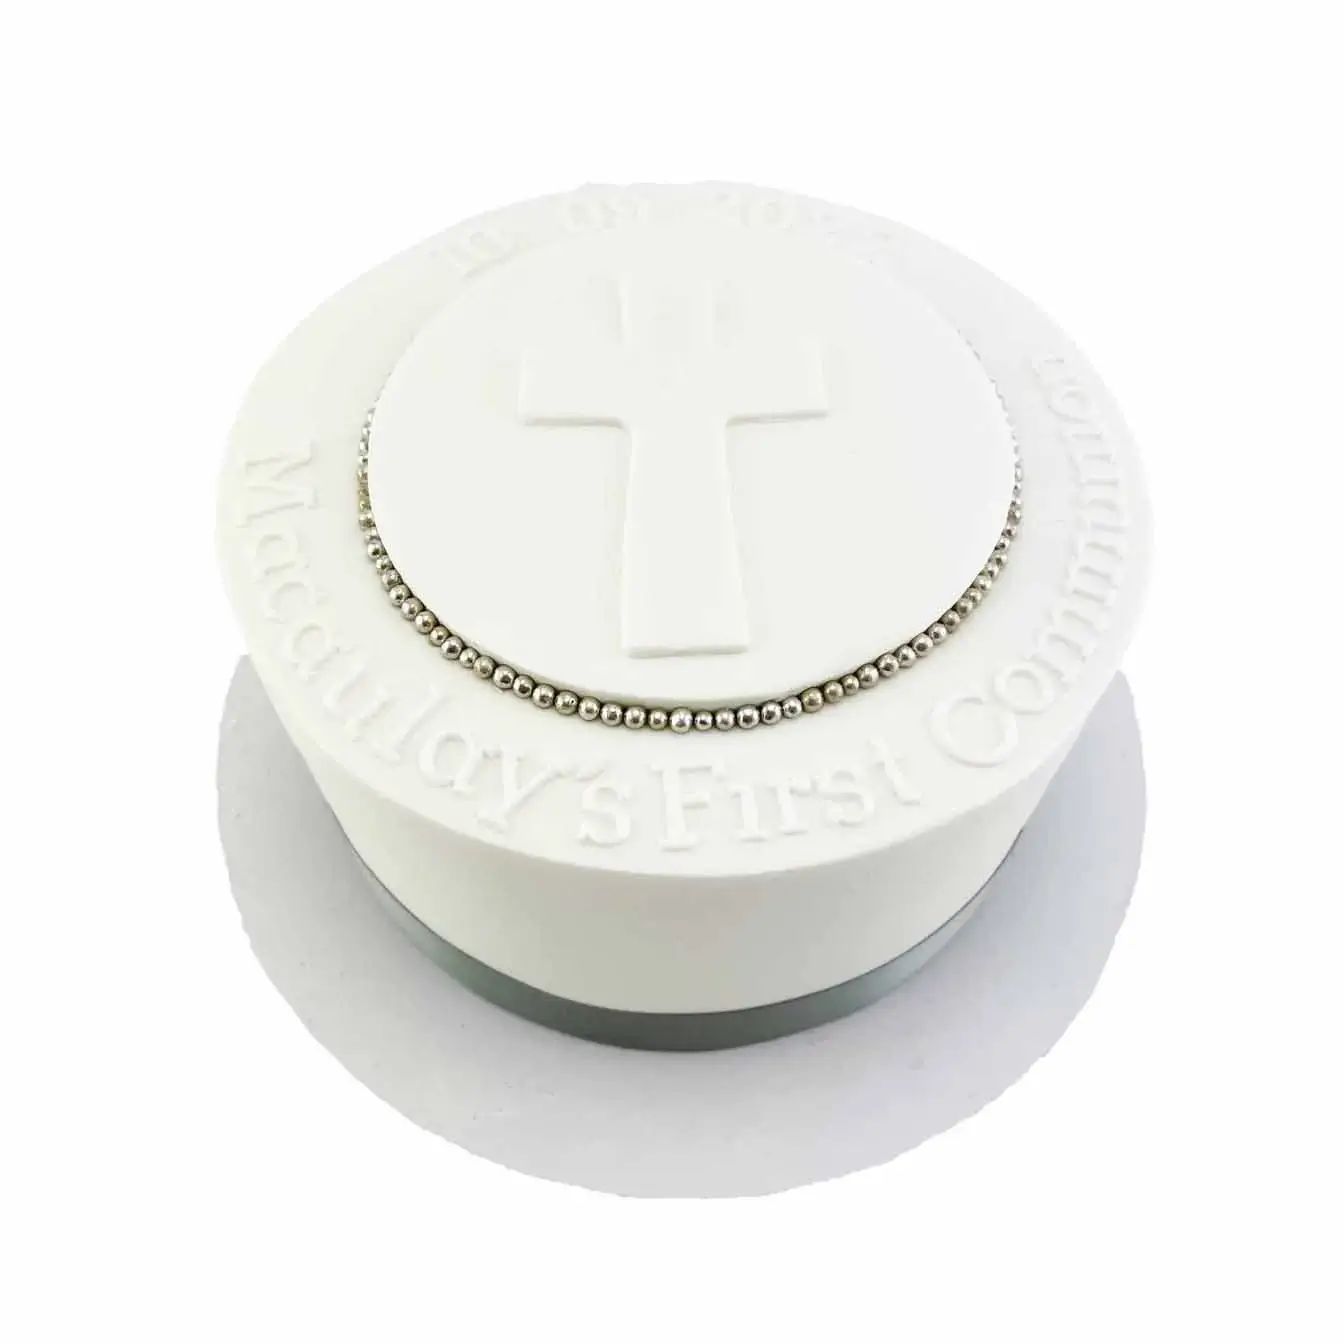 Divine Communion Celebration Cake - A cake with a white cross on top and personalized with name and date, a reverent centerpiece for First Holy Communion and other spiritual milestones.